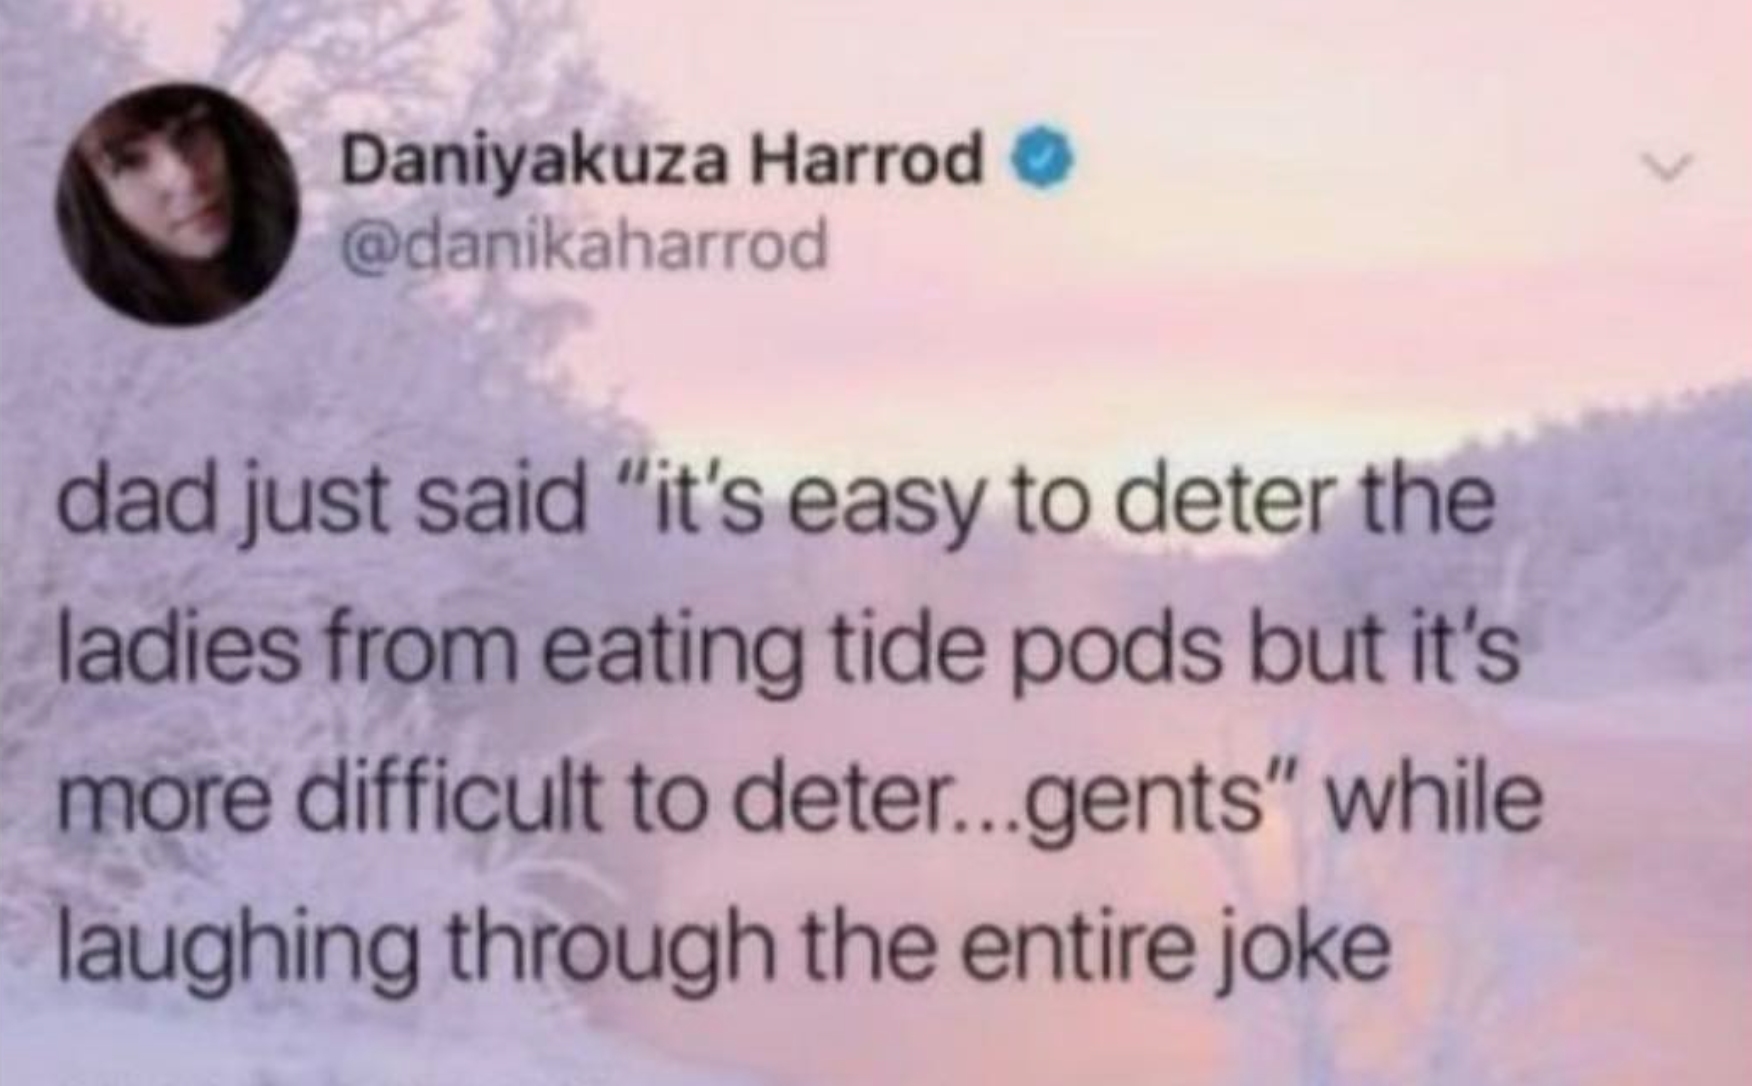 sky - Daniyakuza Harrod dad just said "it's easy to deter the ladies from eating tide pods but it's more difficult to deter...gents" while laughing through the entire joke